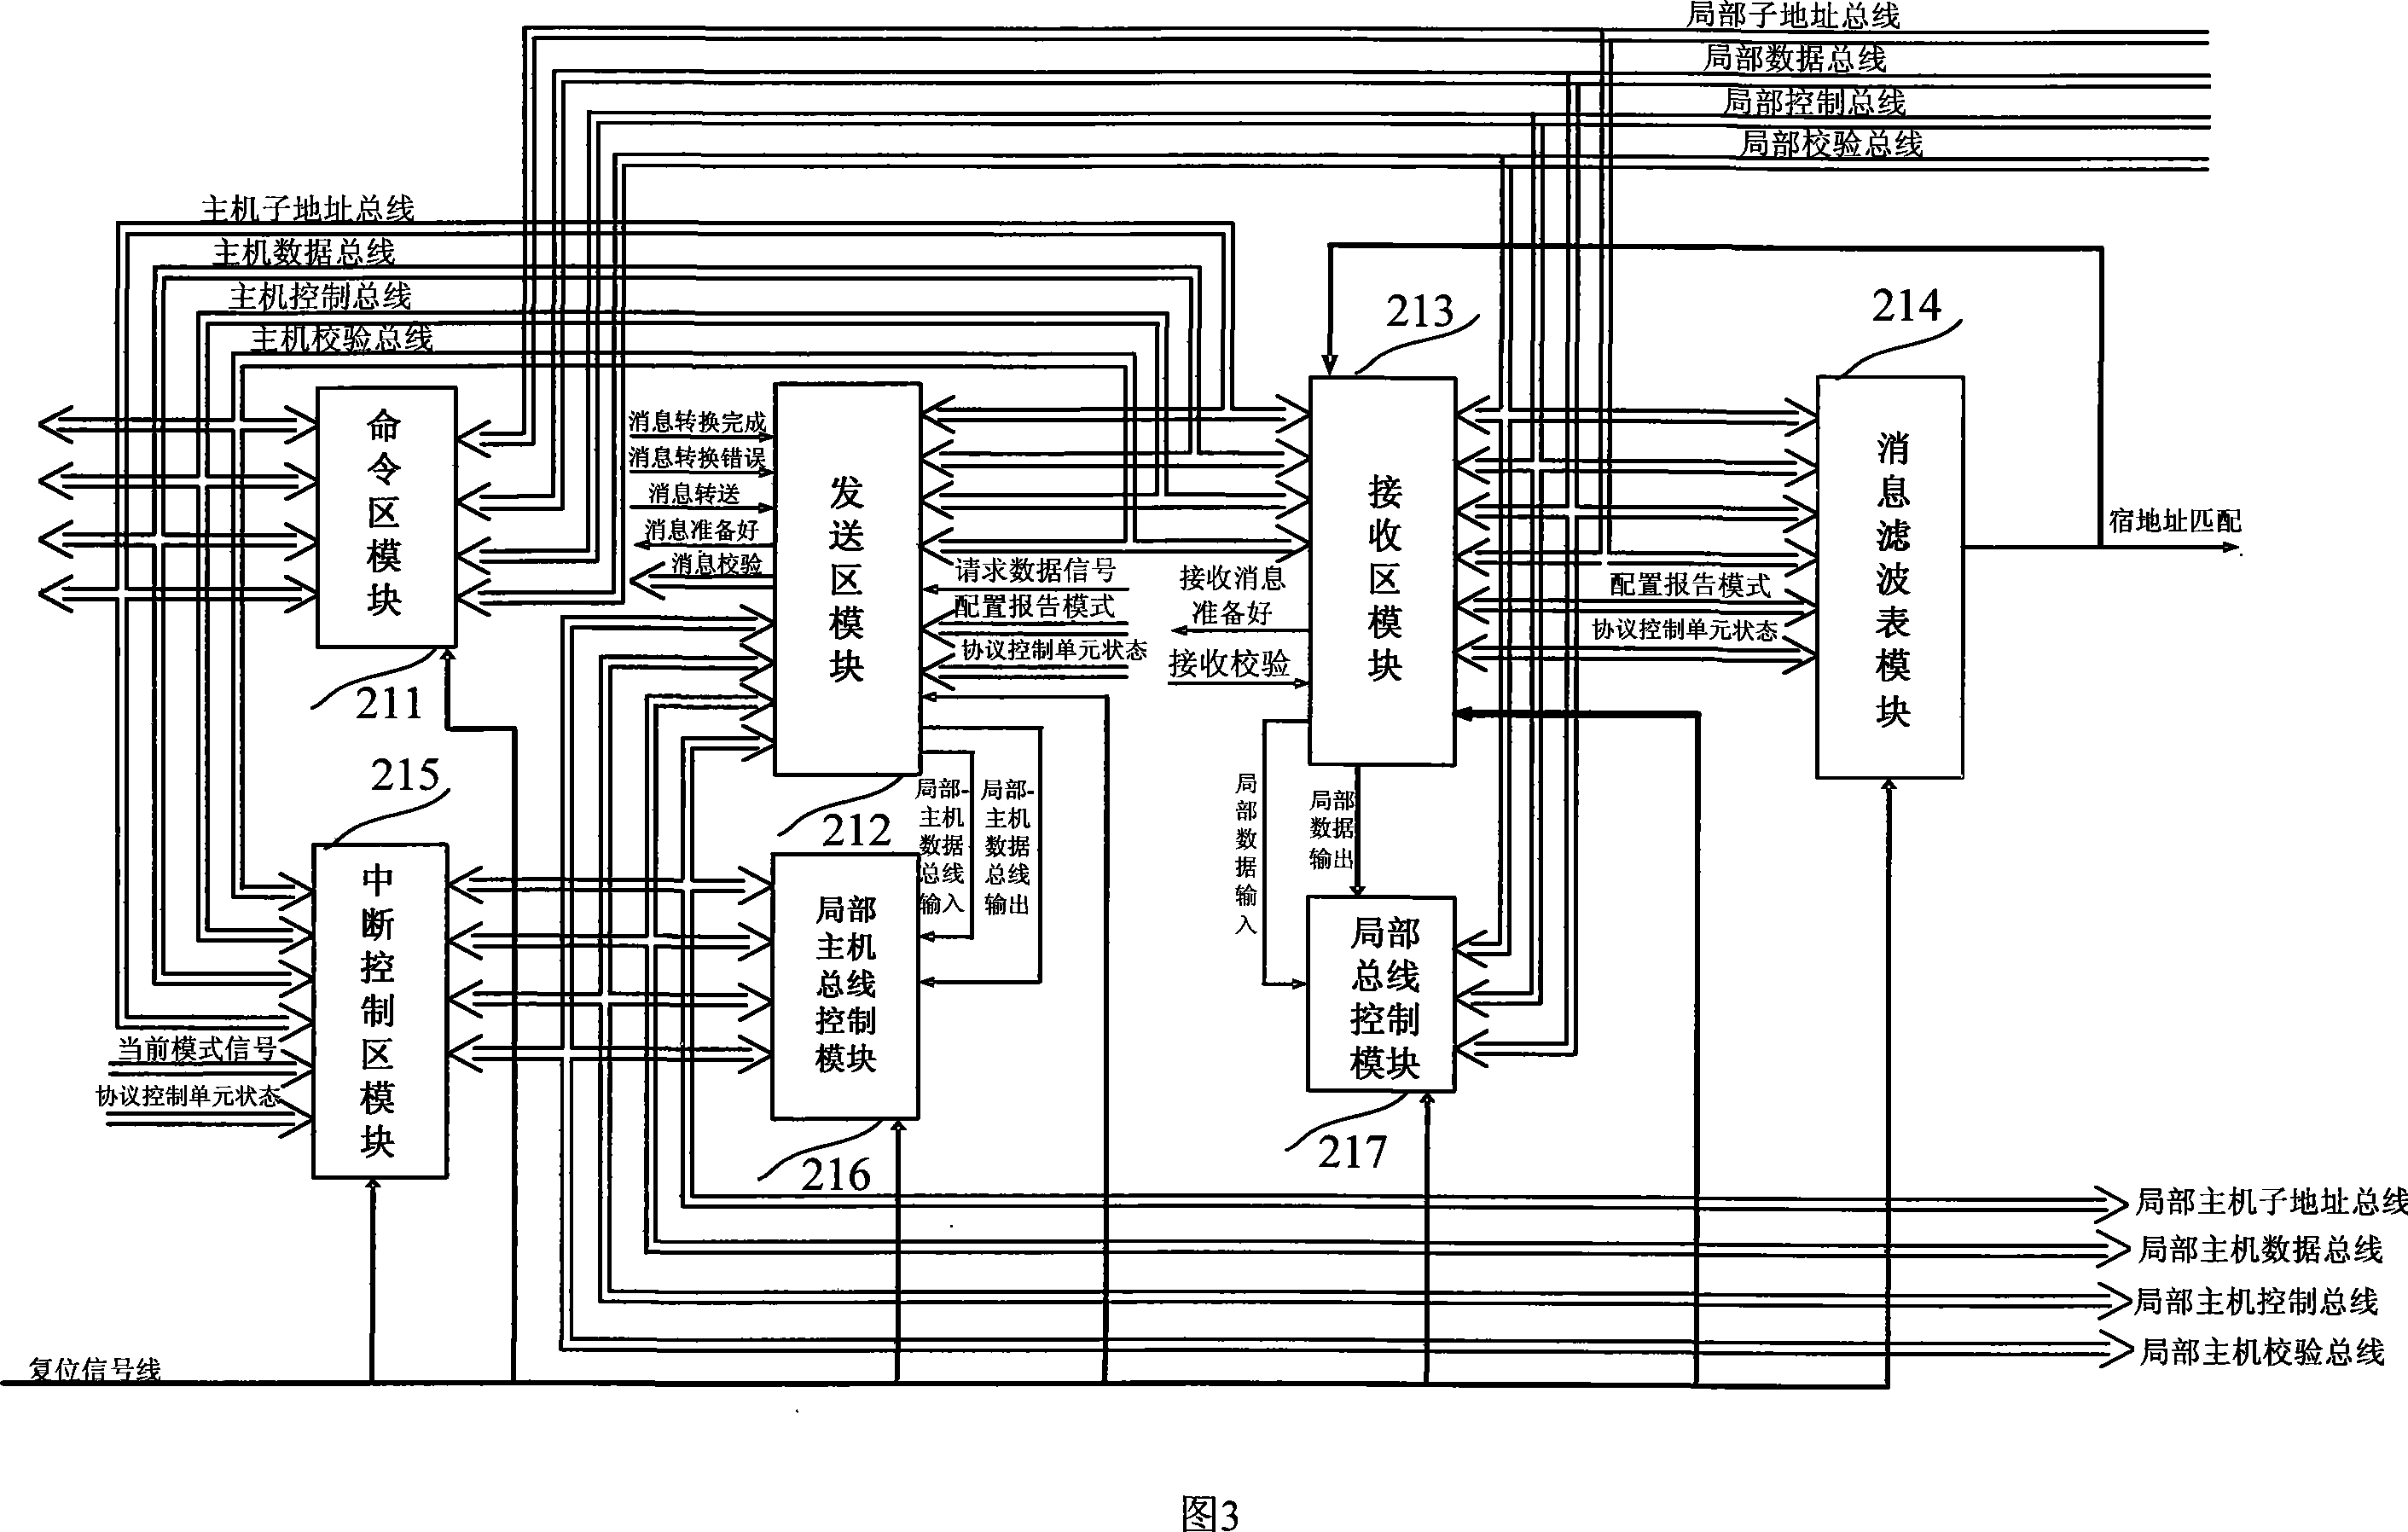 A testing device and operation method for broadband aviation electronic bus